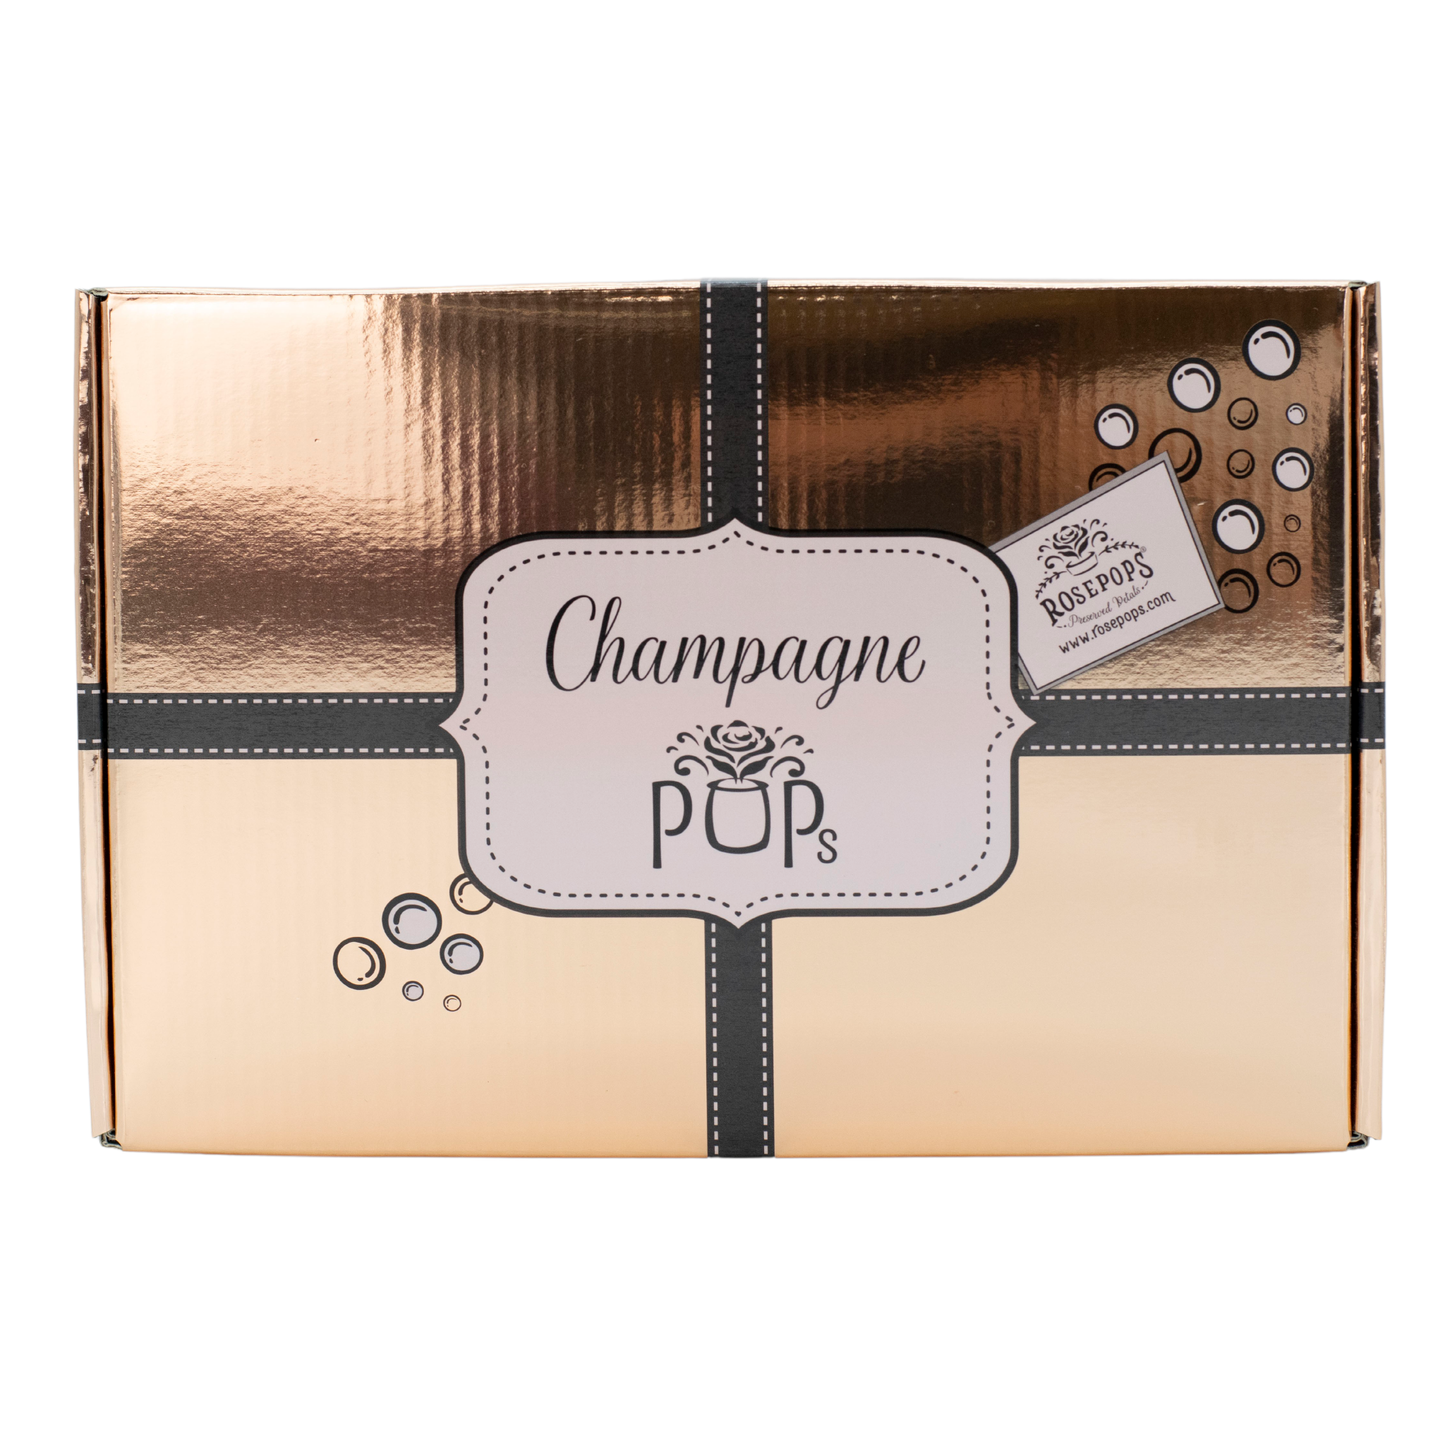 Flight of Golds Champagne POPs Deluxe